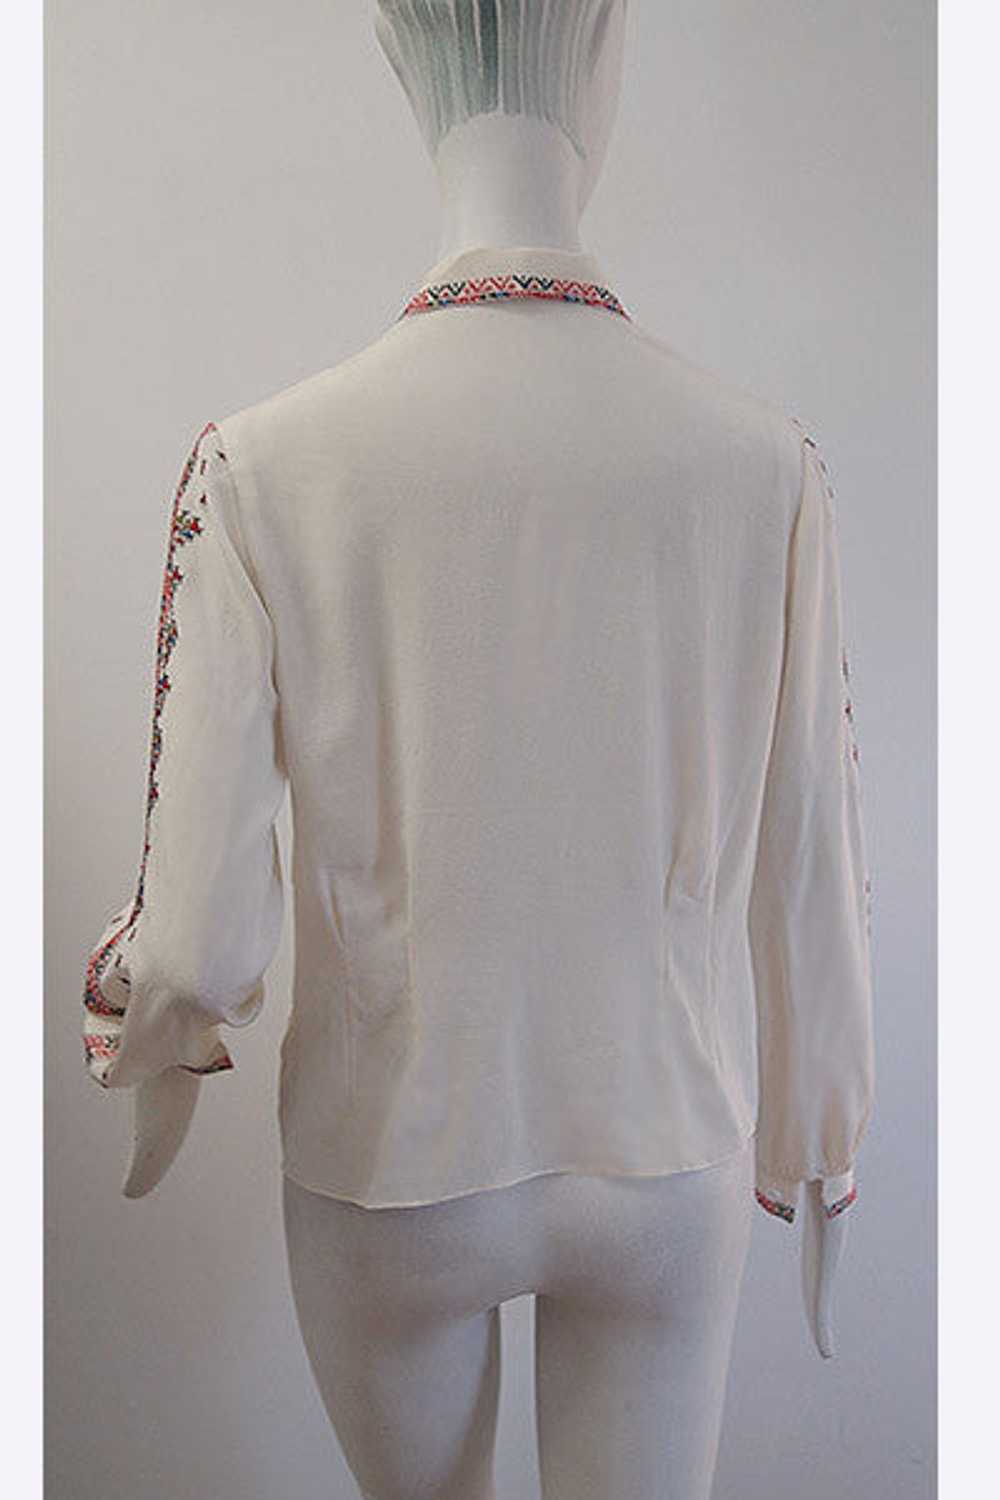 VINTAGE ROMANIAN Embroidered Peasant Top Shirt Blouse. Beautiful